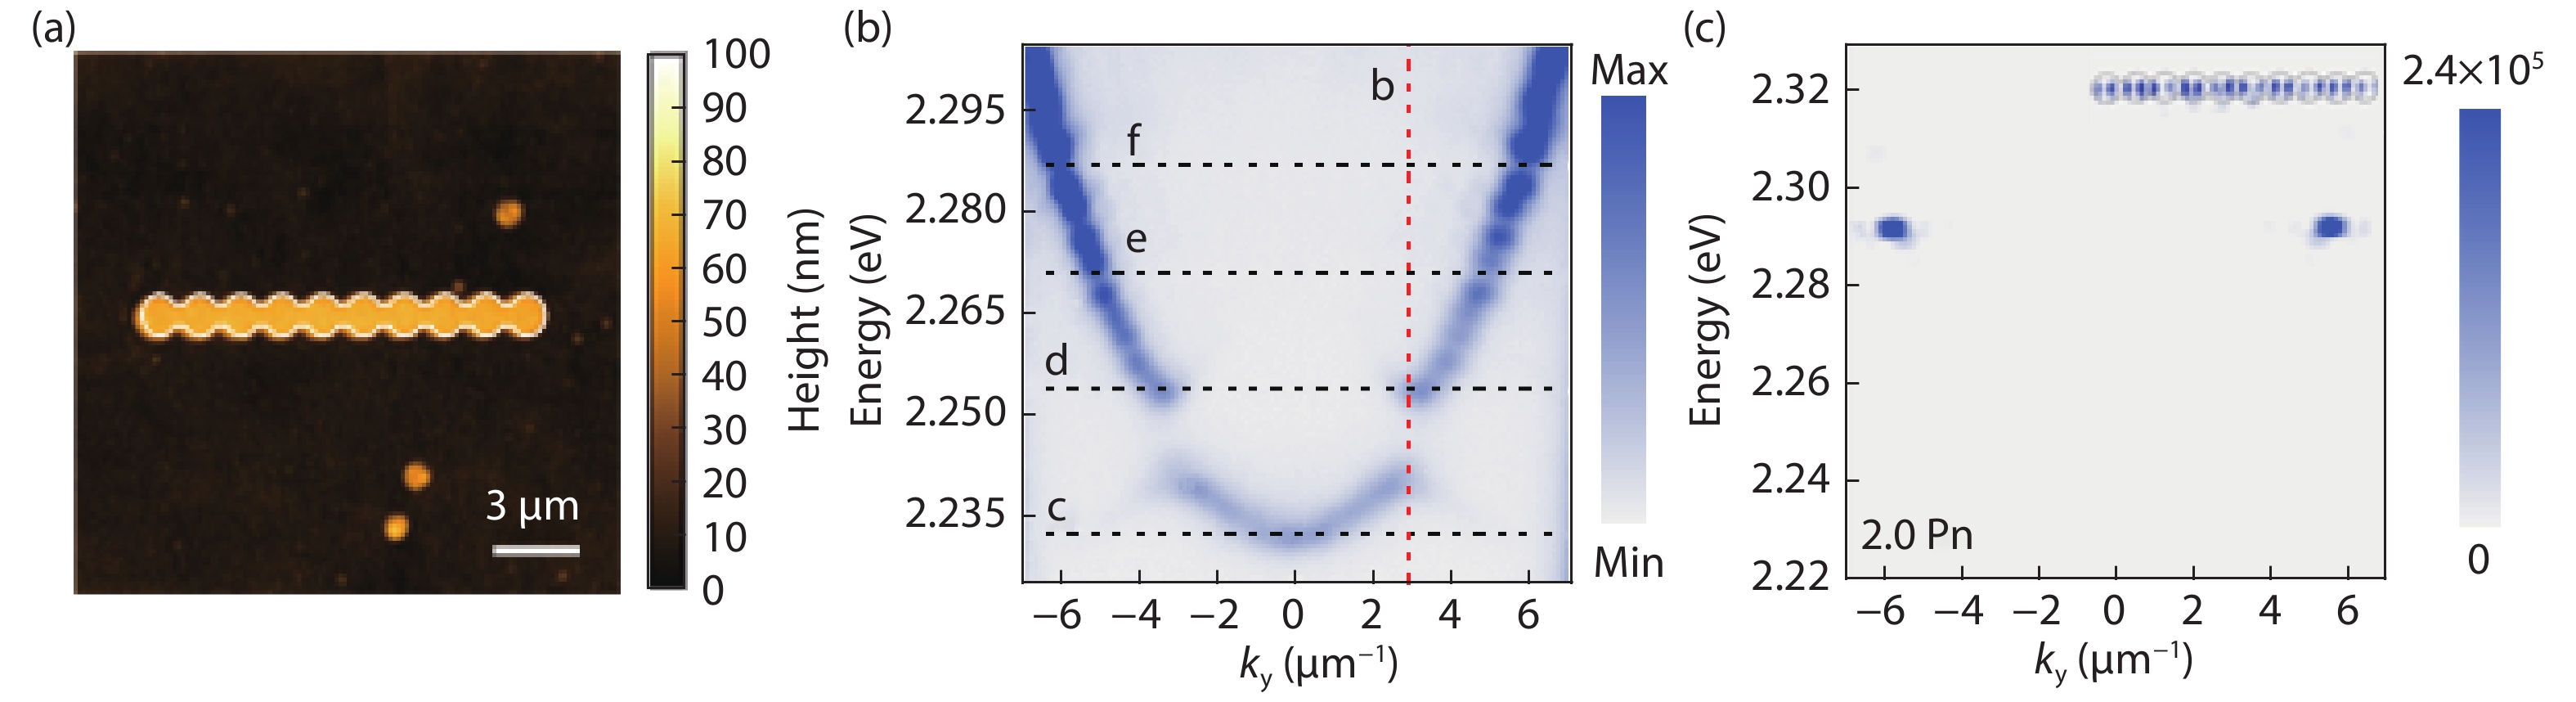 (Color online) (a) Atomic microscopy image of the perovskite lattice. (b) Energy-resolved dispersion of the perovskite lattice below the threshold. (c) Energy-resolved dispersion of the perovskite lattice above the threshold. Inset, the real space image above the threshold, showing clear py orbital state feature.